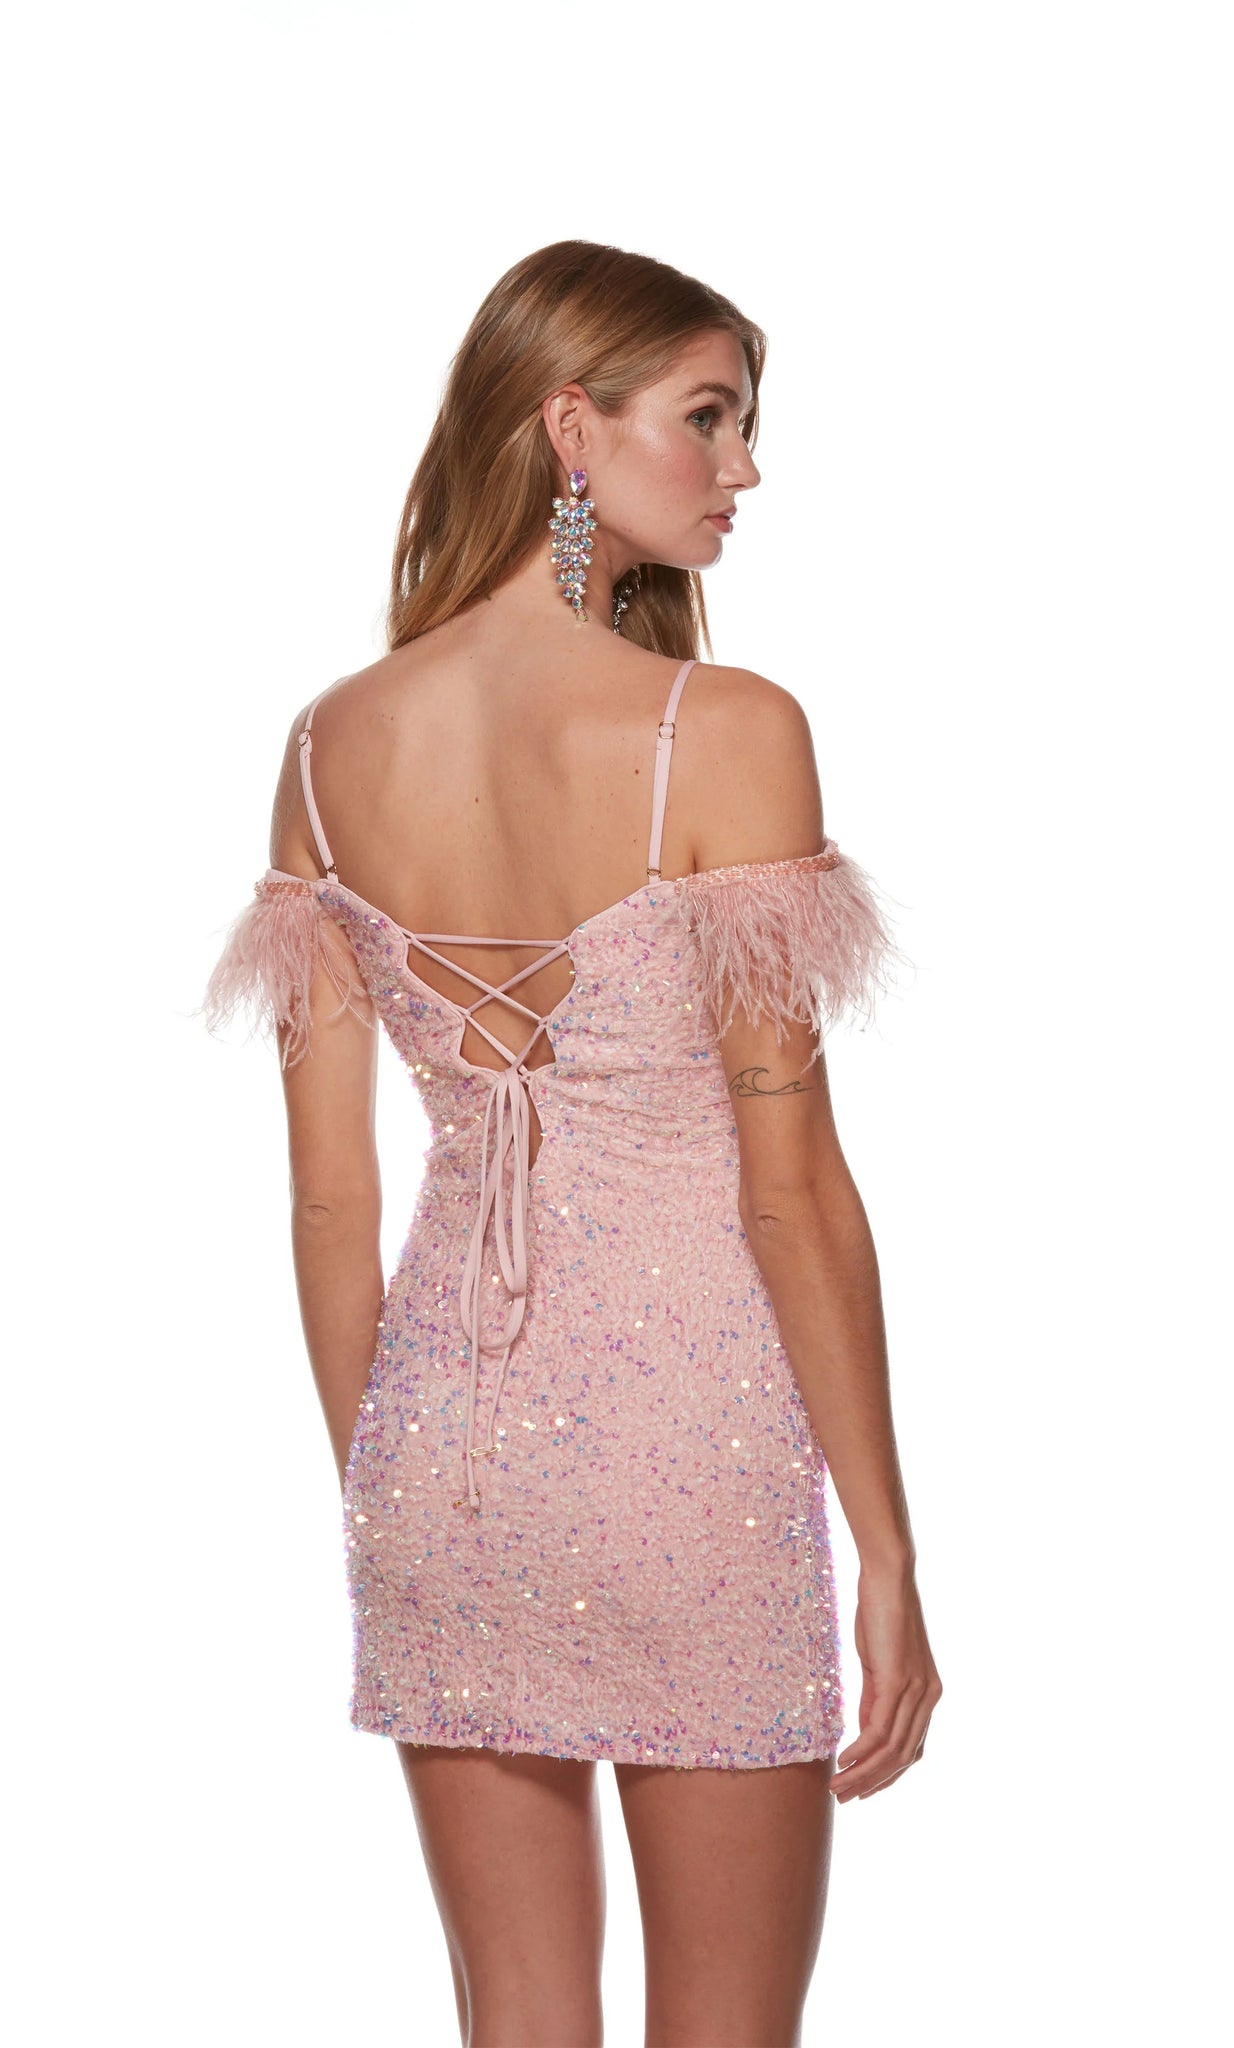 Stop the show as you walk in wearing short fitted dress style 4759 by Alyce Paris. This short fitted dress showcases an off the shoulder neckline with fun feathered cap sleeves. The dress also features thin straps that lead to an open back with a corset lace up that is adjustable to your own liking. The fun beadwork and sequins all around the dress will make you shine through the night.